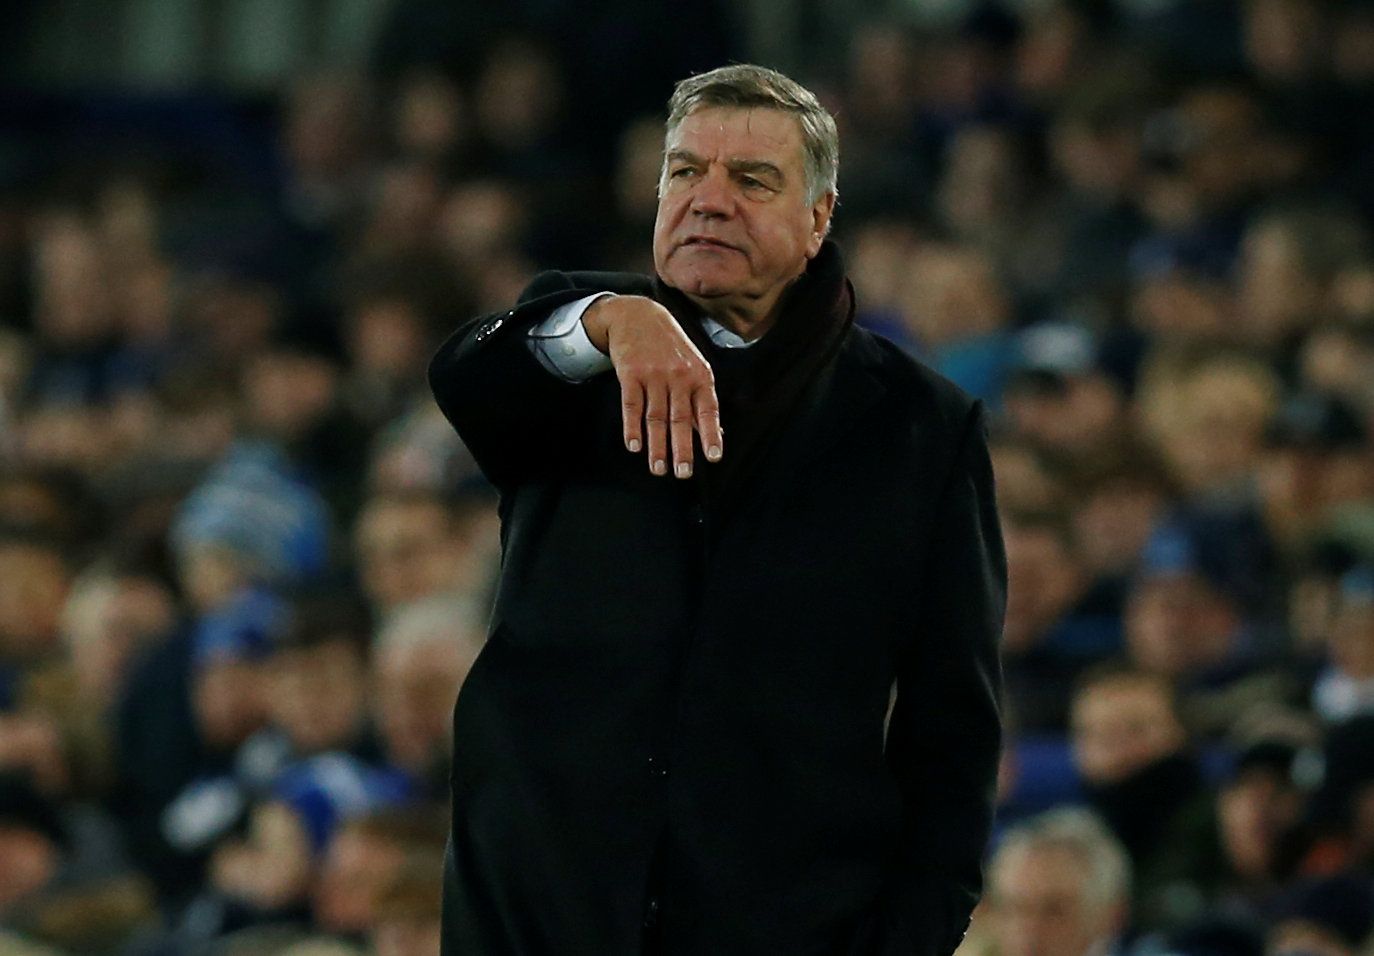 Soccer Football - Premier League - Everton vs West Bromwich Albion - Goodison Park, Liverpool, Britain - January 20, 2018   Everton manager Sam Allardyce gestures     REUTERS/Andrew Yates    EDITORIAL USE ONLY. No use with unauthorized audio, video, data, fixture lists, club/league logos or 